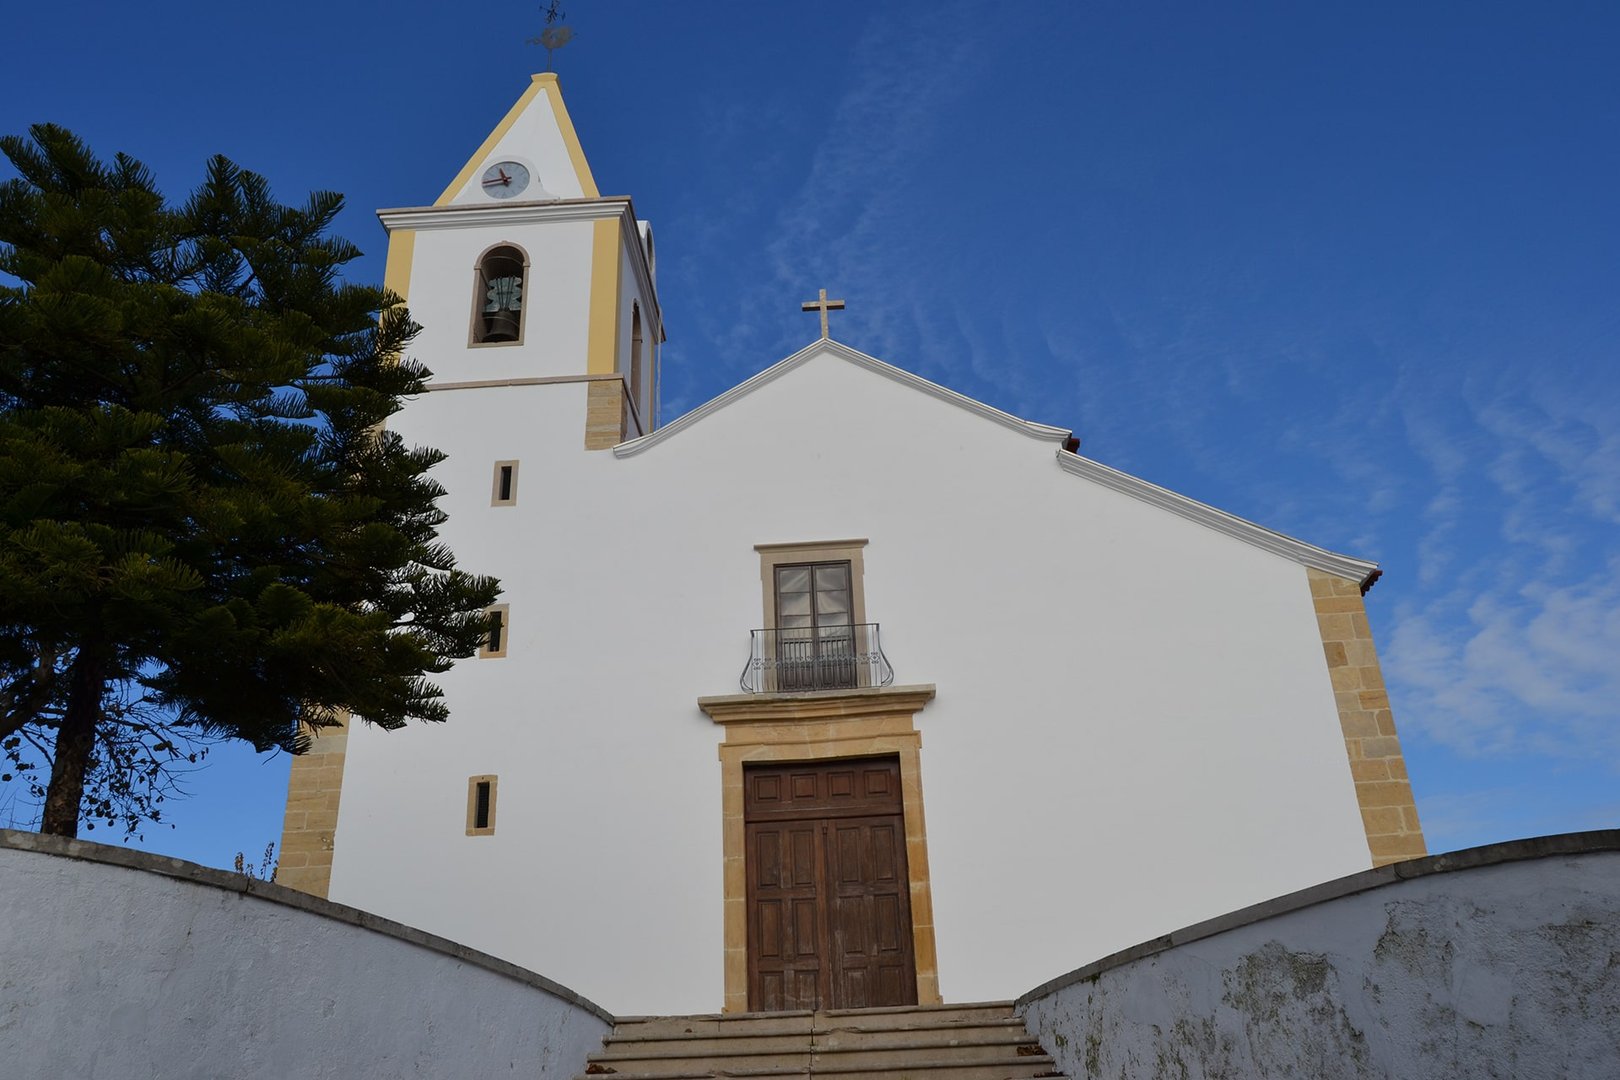 Main facade of the Main Church of Santo Aleixo do Beco, reconstruction from the 17th century, in Mannerist style